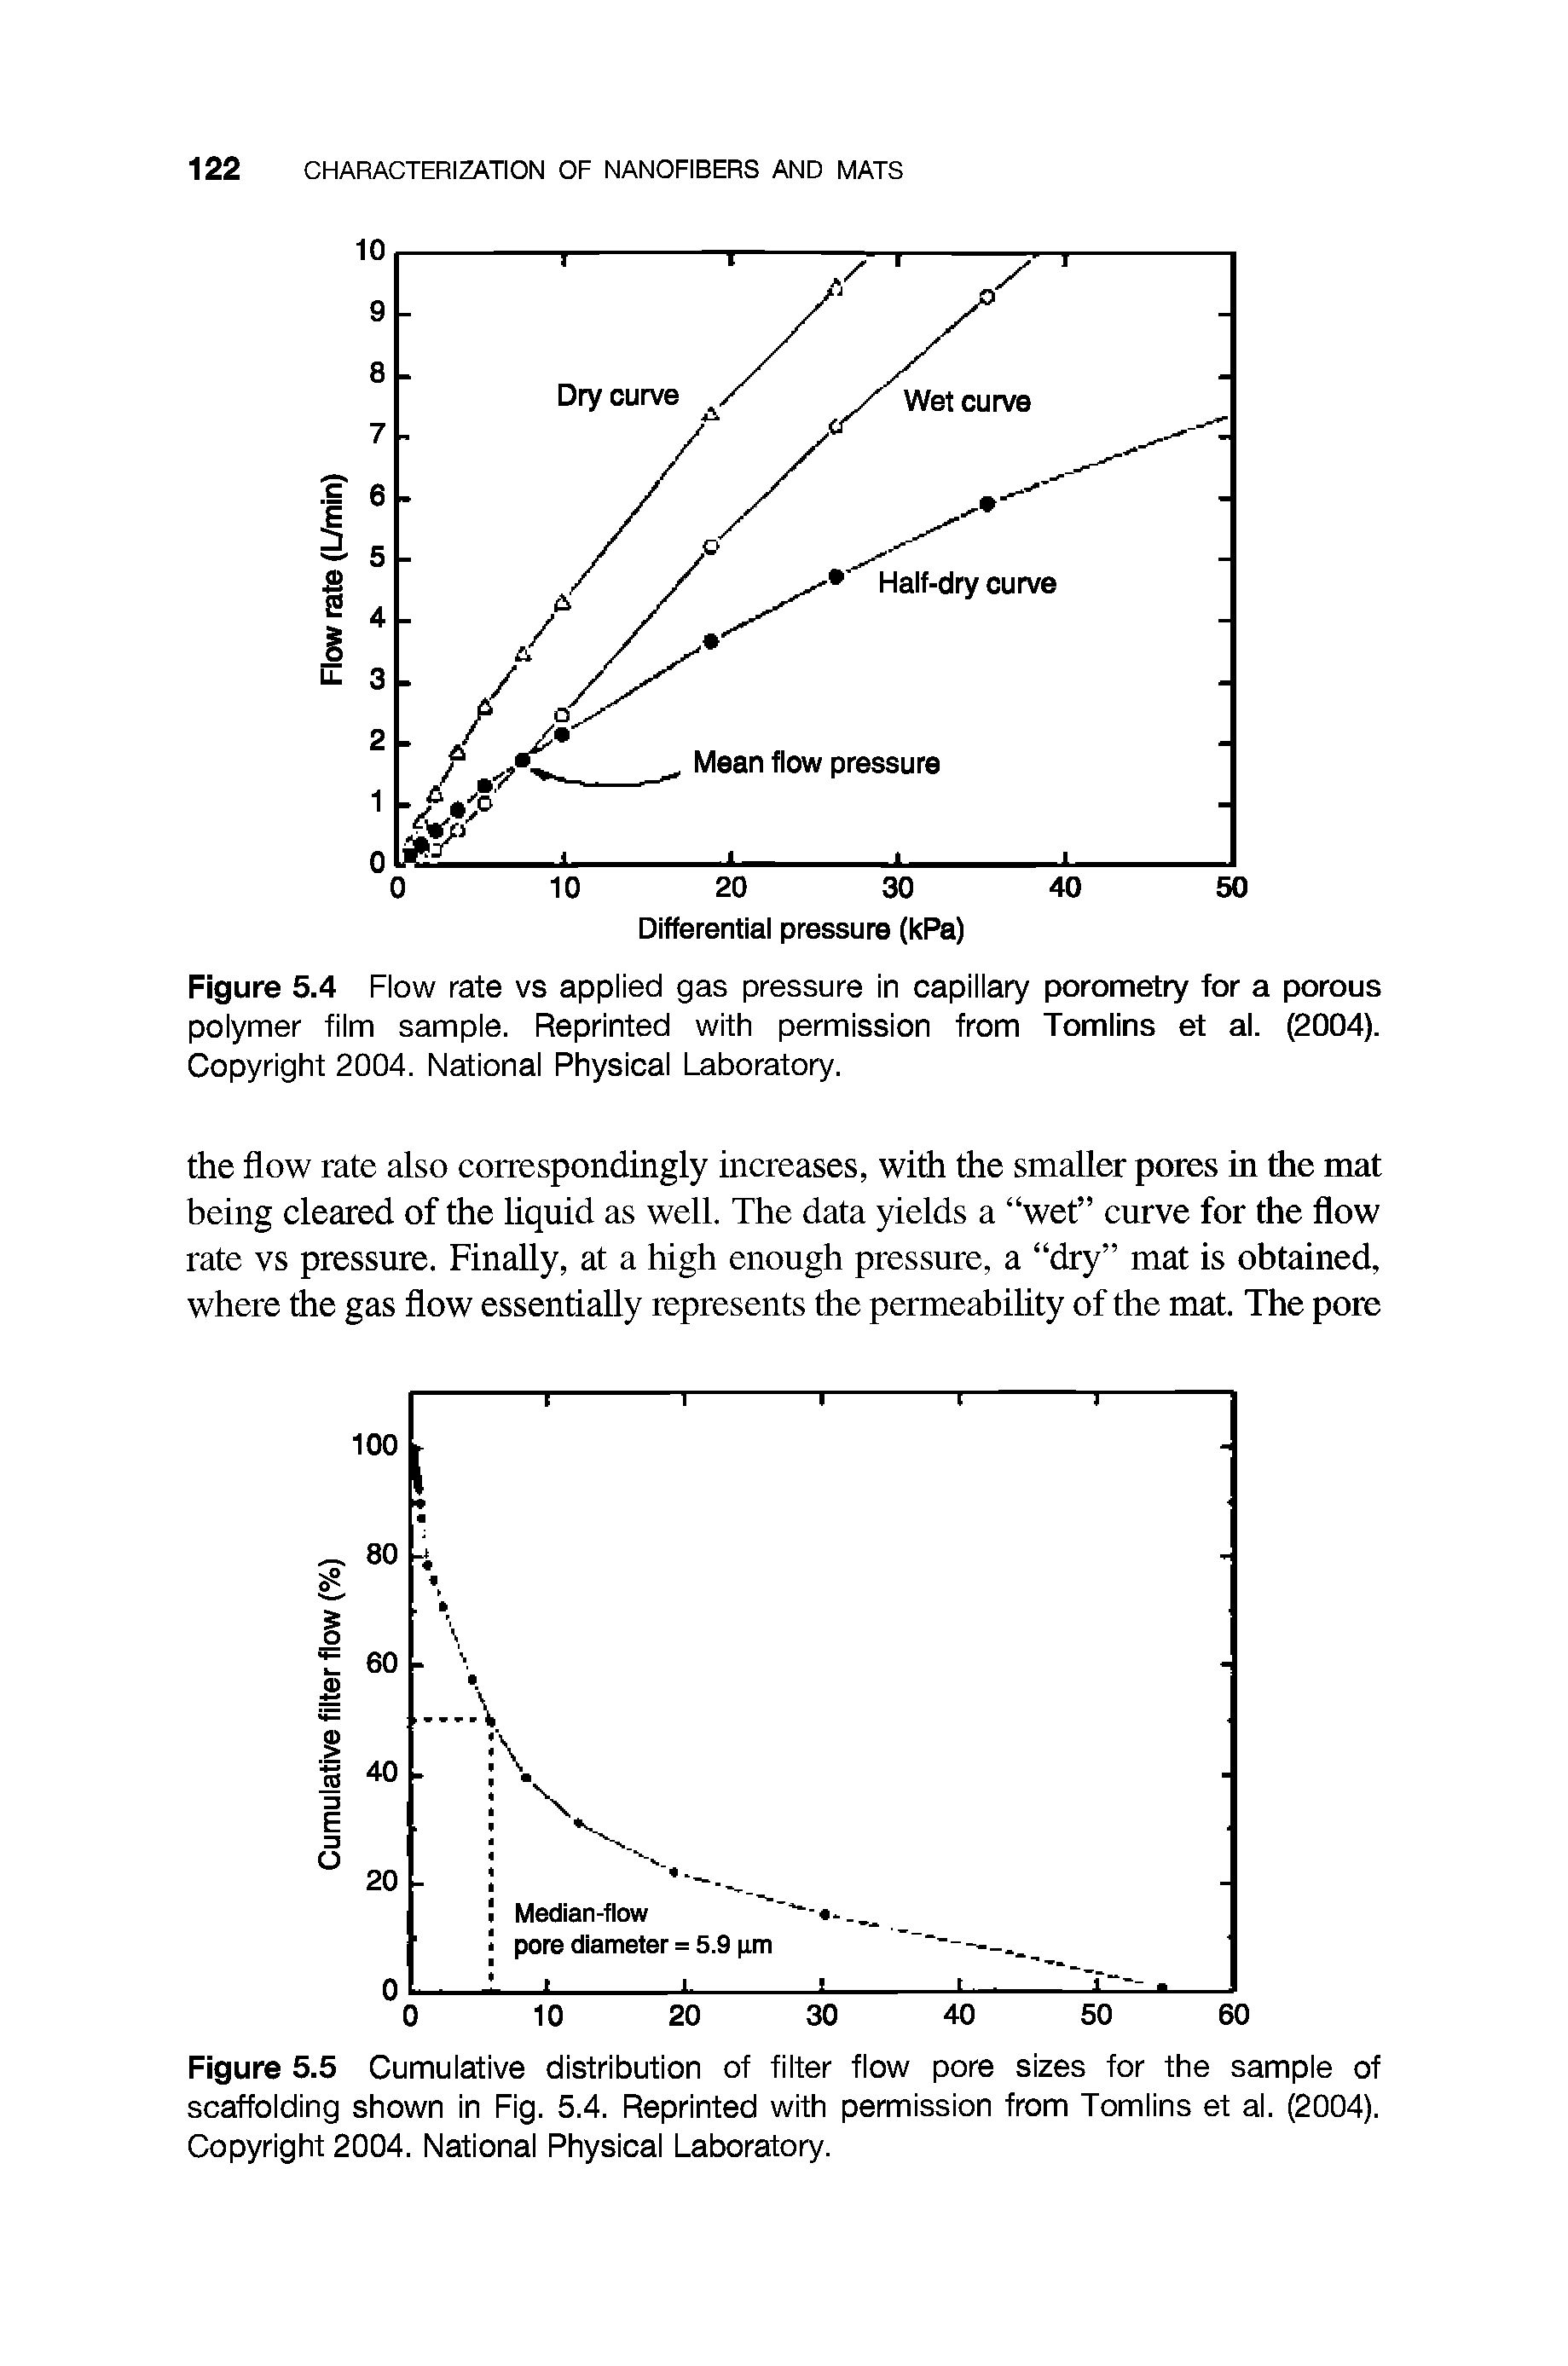 Figure 5.4 Flow rate vs applied gas pressure in capillary porometry for a porous polymer film sample. Reprinted with permission from Tomlins et al. (2004). Copyright 2004. National Physical Laboratory.